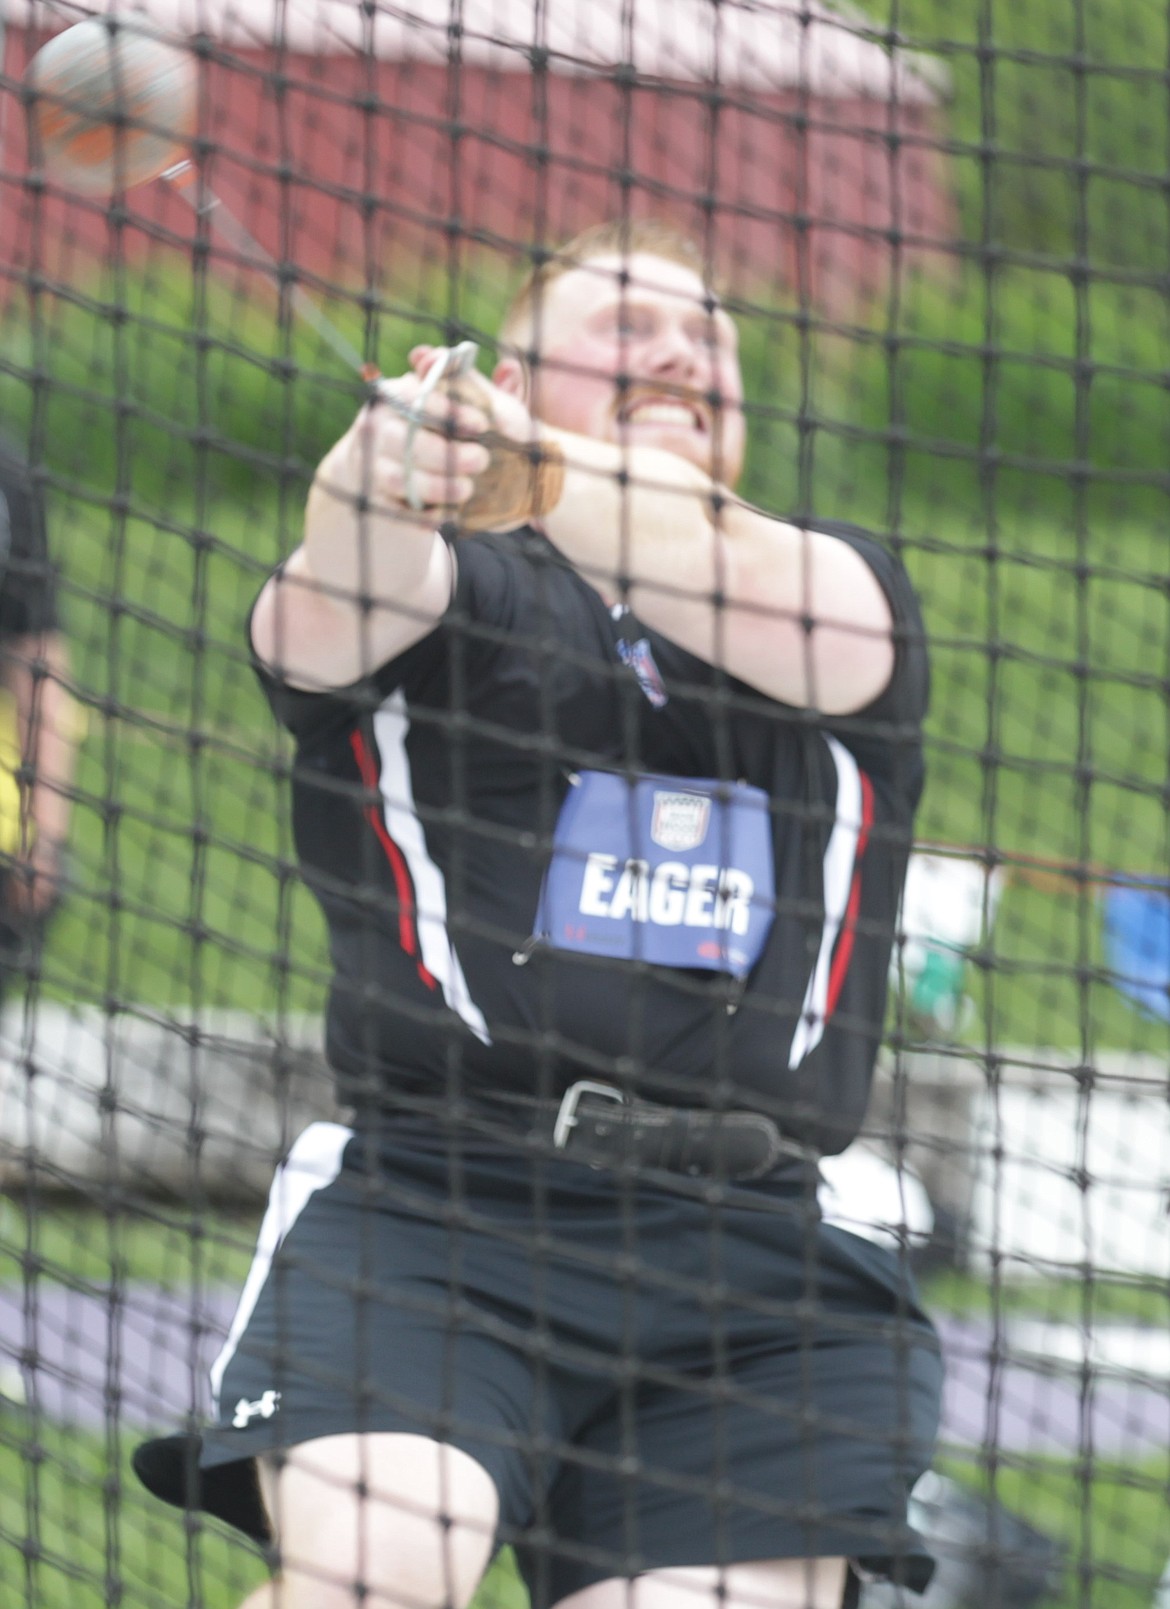 JASON ELLIOTT/Press
Brock Eager, who currently resides in Hayden, prepares to release an attempt during the men's hammer throw at the Iron Wood Throws Training Center in Rathdrum. Eager, who was sixth at the 2021 Olympic Trials in Eugene, was second in Saturday's meet.